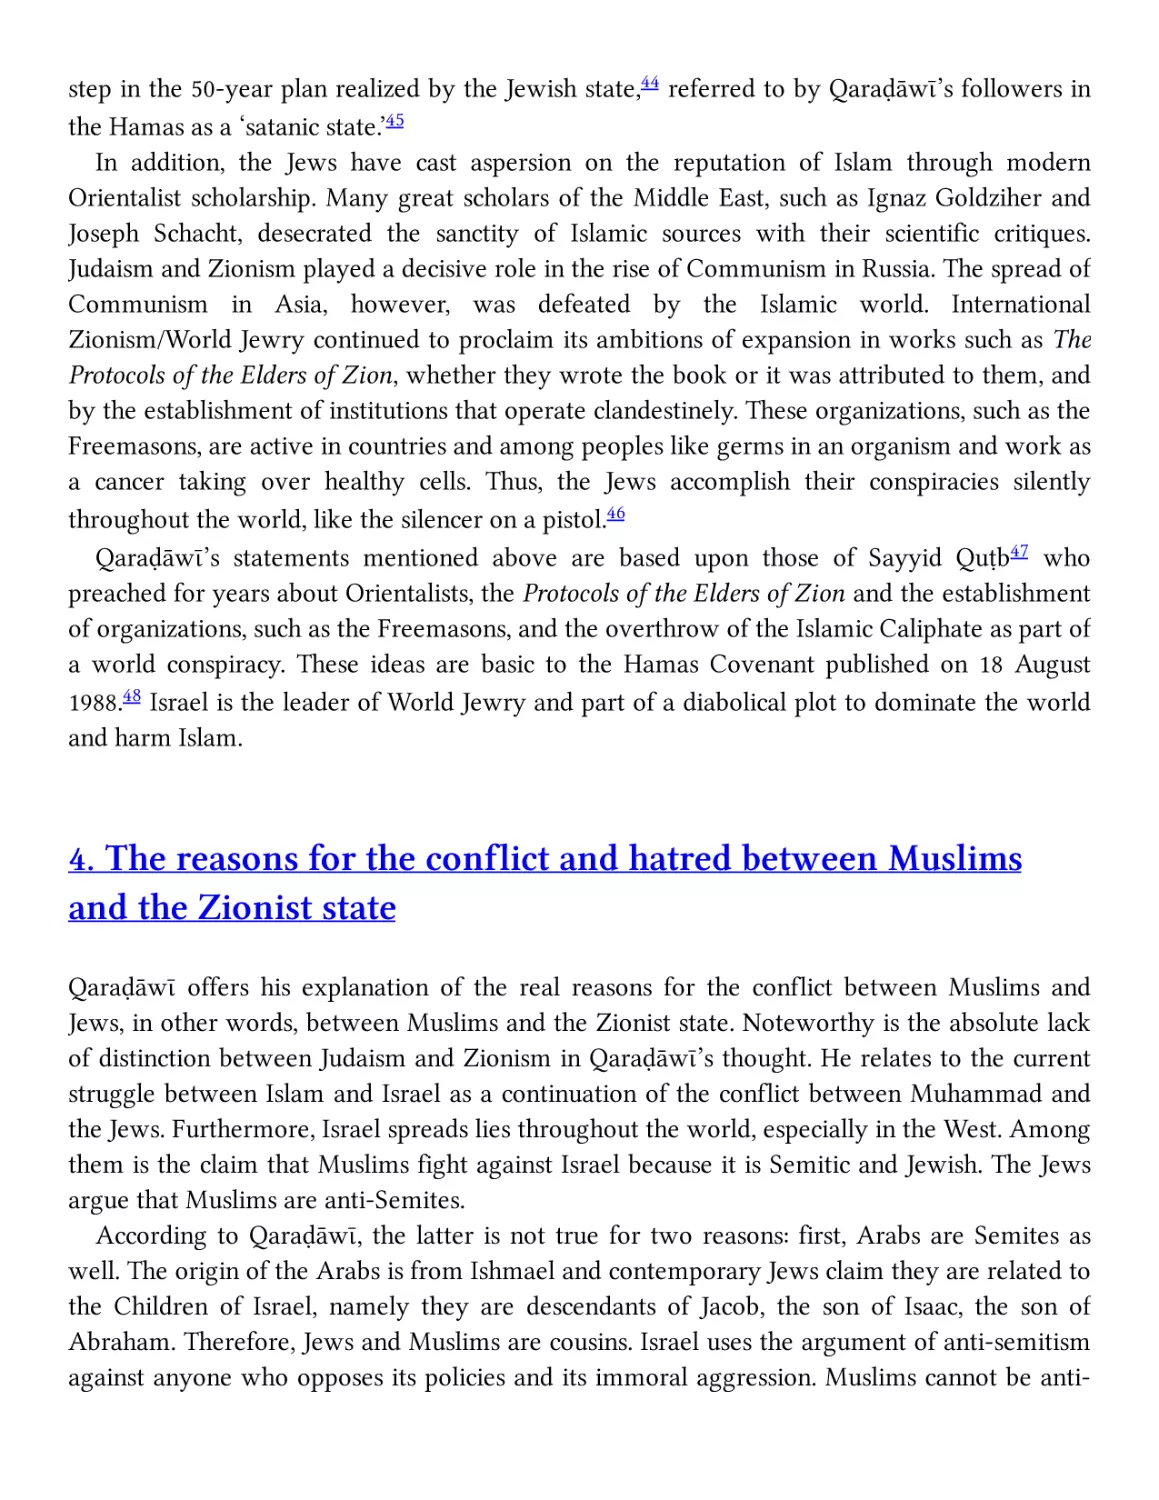 4. The reasons for the conflict and hatred between Muslims and the Zionist state